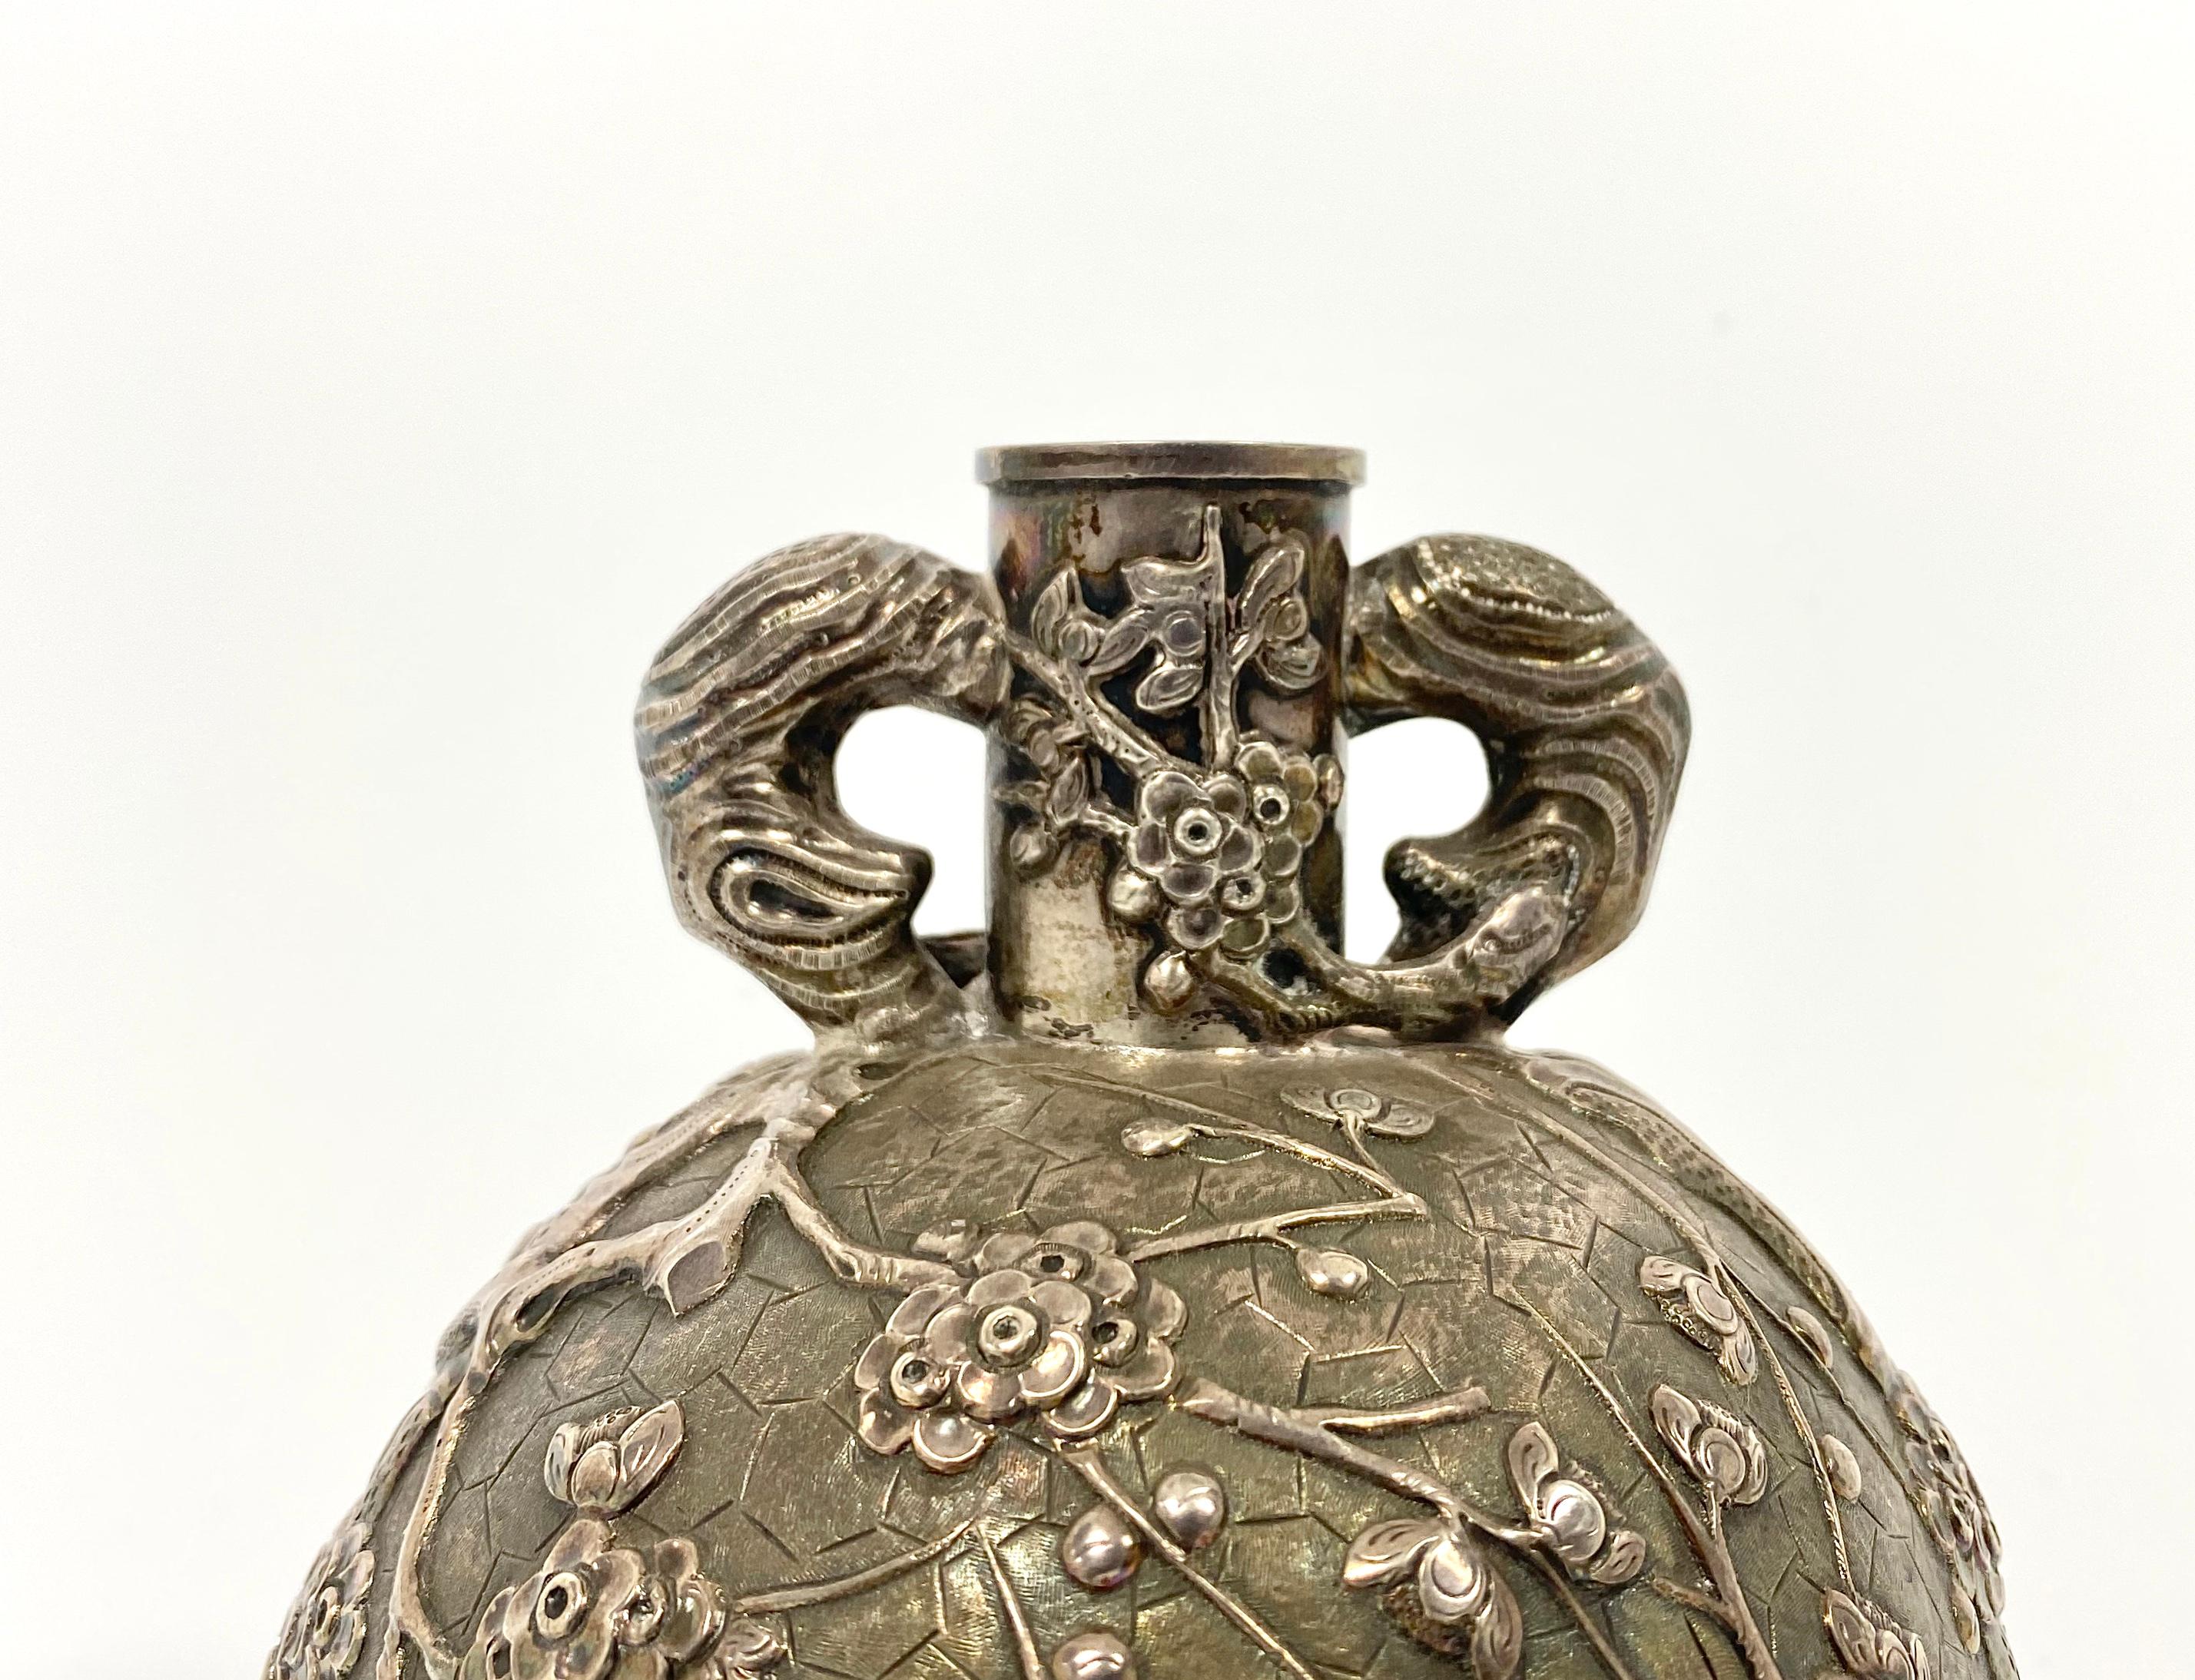 Chinese Export Chinese Silver Flask ‘Cherry blossom on a cracked ice ground’, Luen Wo, Shanghai